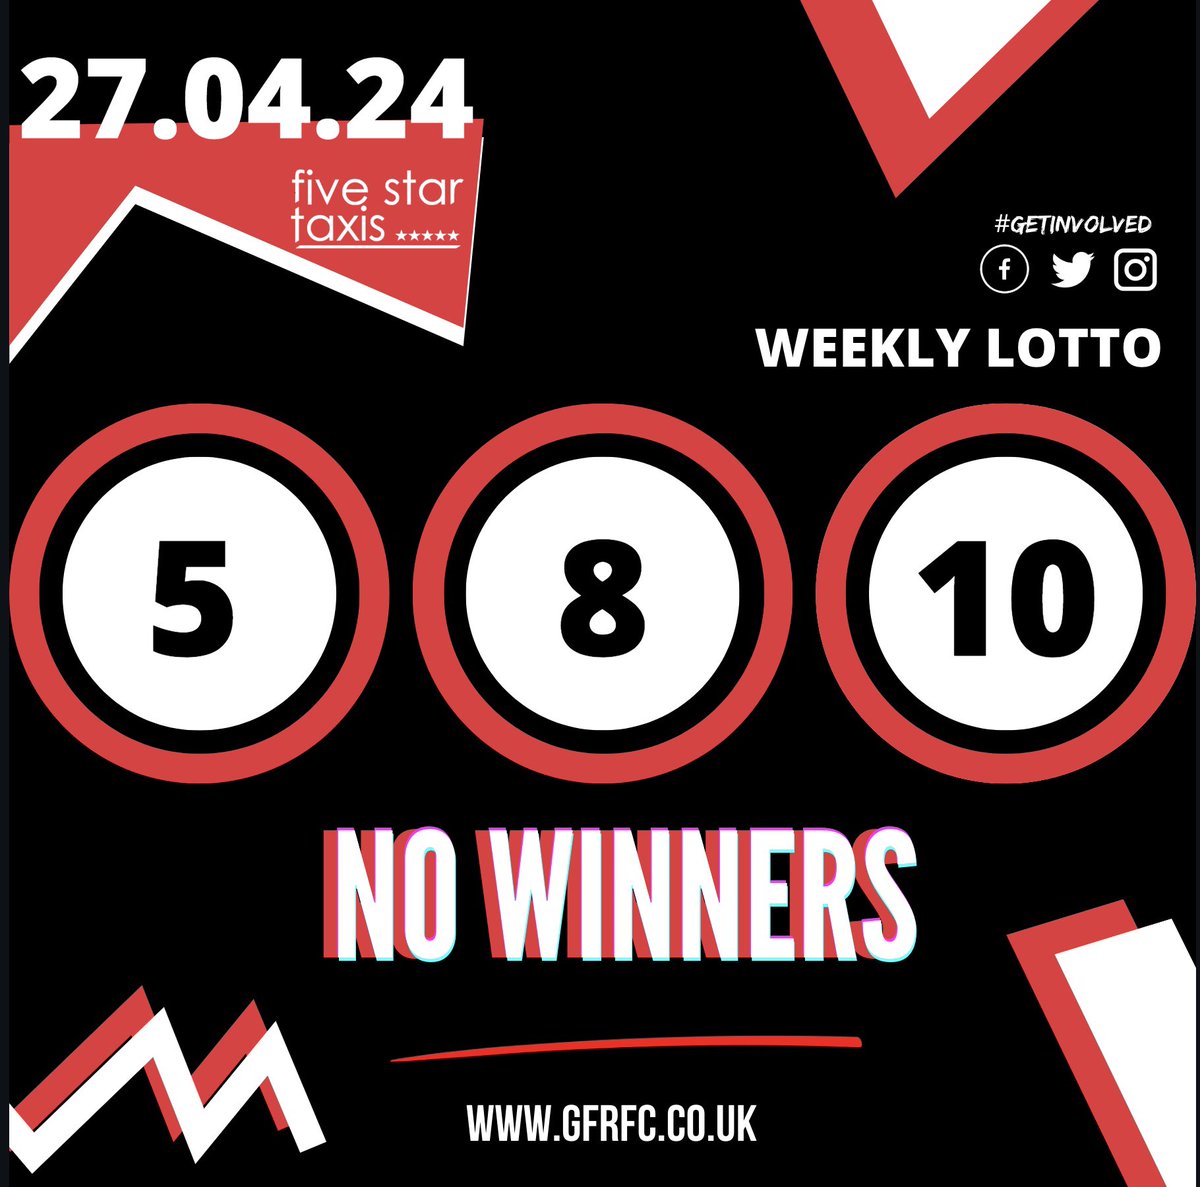 🔺◾️ 𝗪𝗲𝗲𝗸𝗹𝘆 𝗟𝗼𝘁𝘁𝗼 ◾️🔺 🎰 5 - 8 - 10 ❌ No winners 🤩 Next estimated prize £1000 🎟 get your tickets from the bar or - ▶️ PLAY NOW online- clubforce.com/clubs/gala-fai… 🎰 Drawn Saturday Night #GETINVOLVED ❤️⚫️